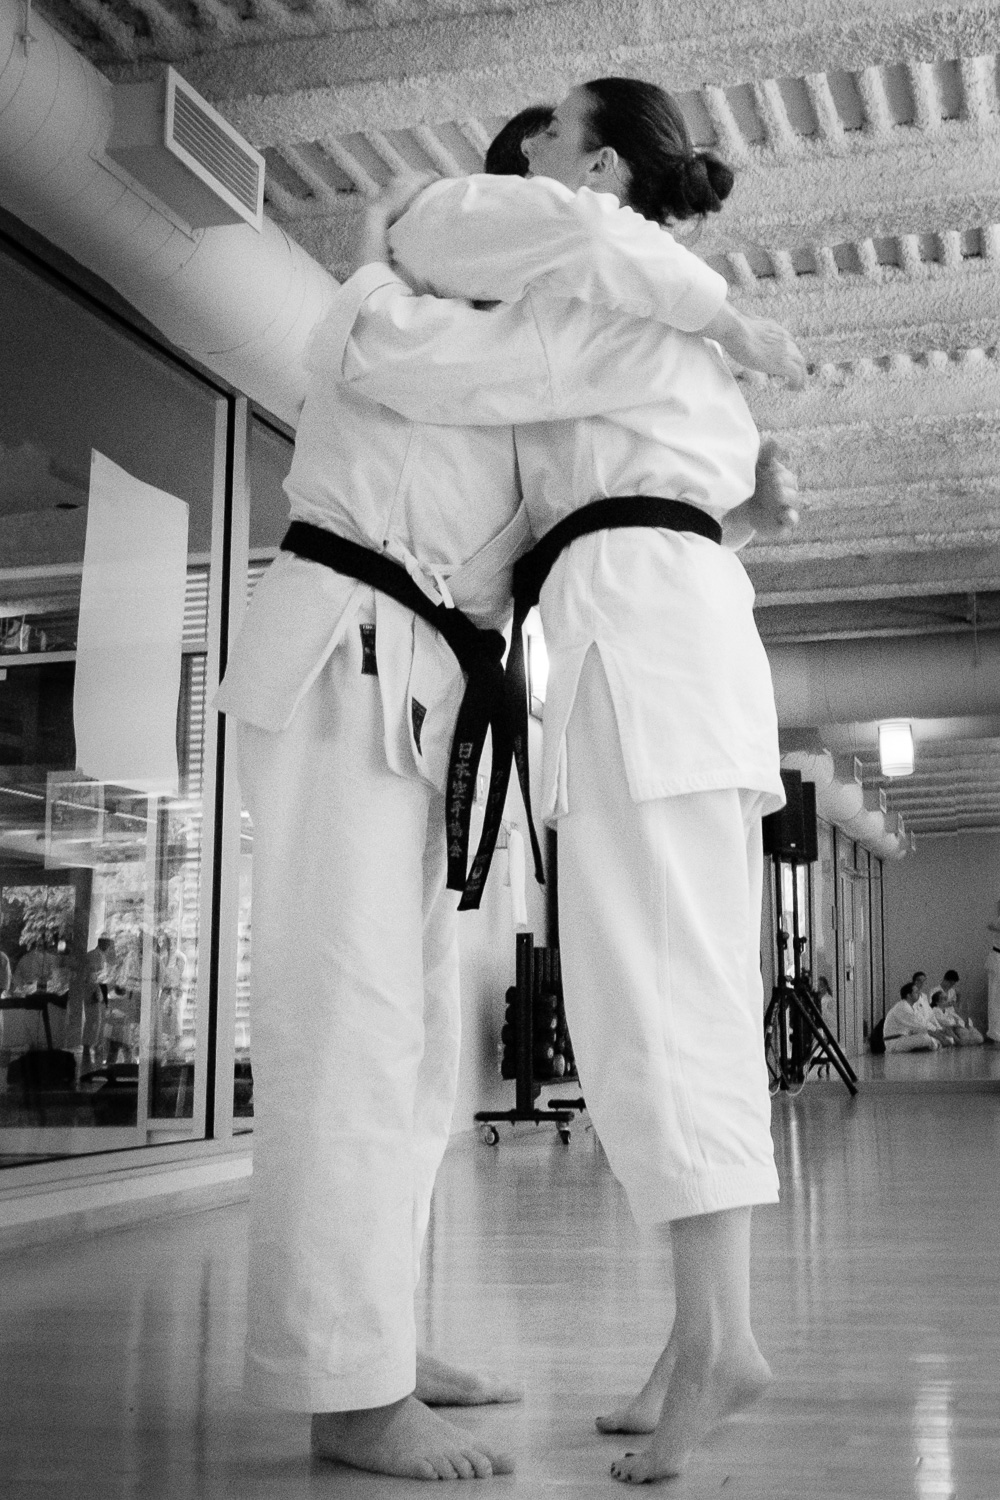 MiA_This-is-karate_20150613_6161